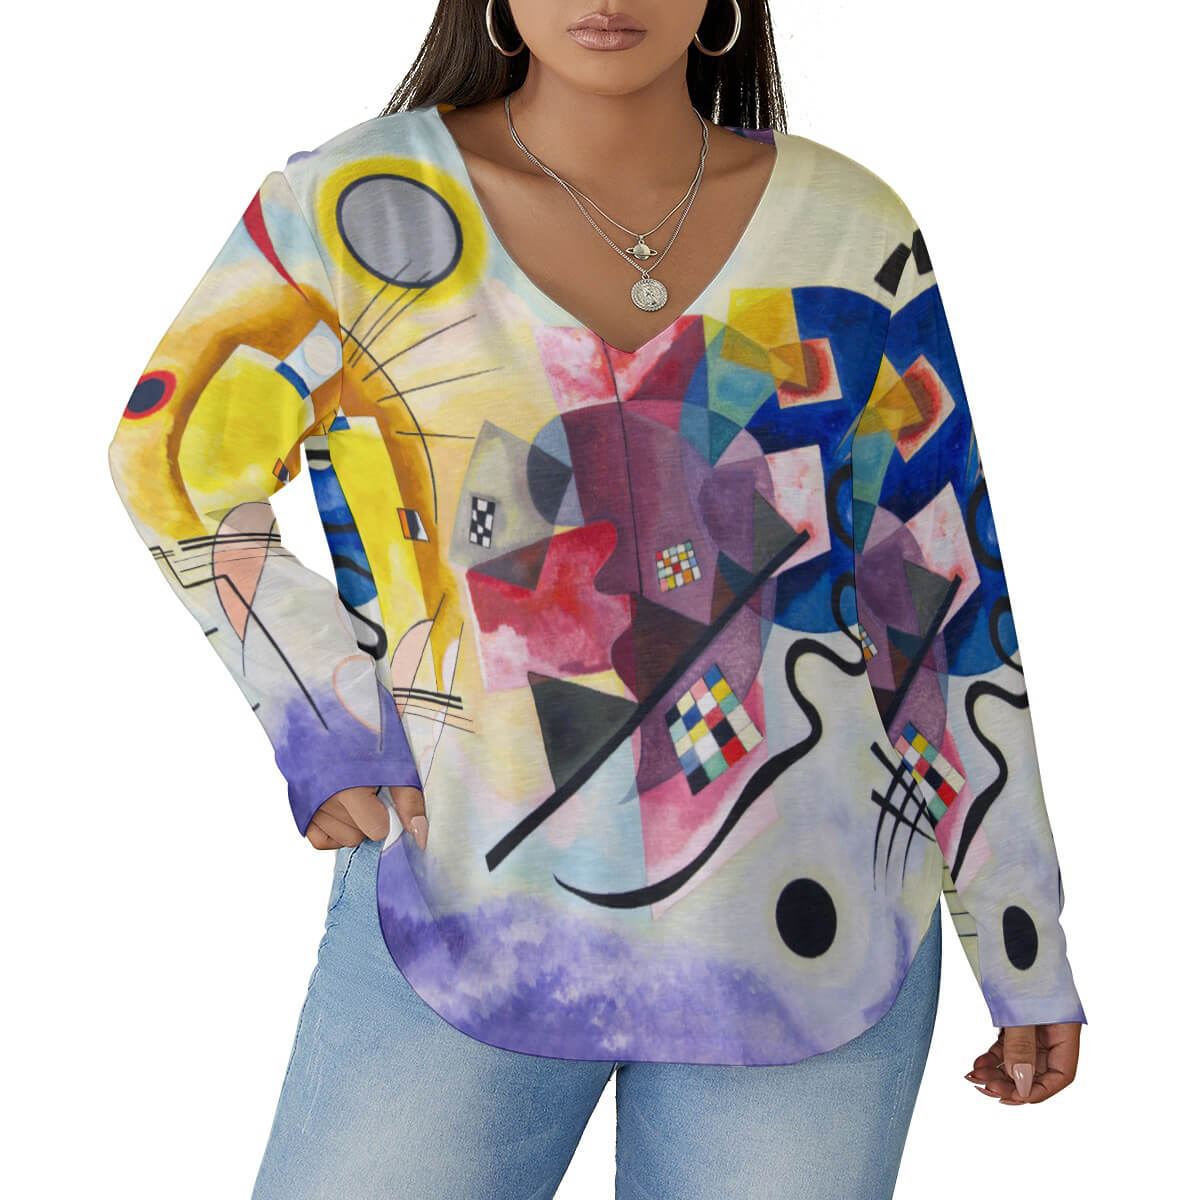 Vibrant plus size shirt inspired by Wassily Kandinsky